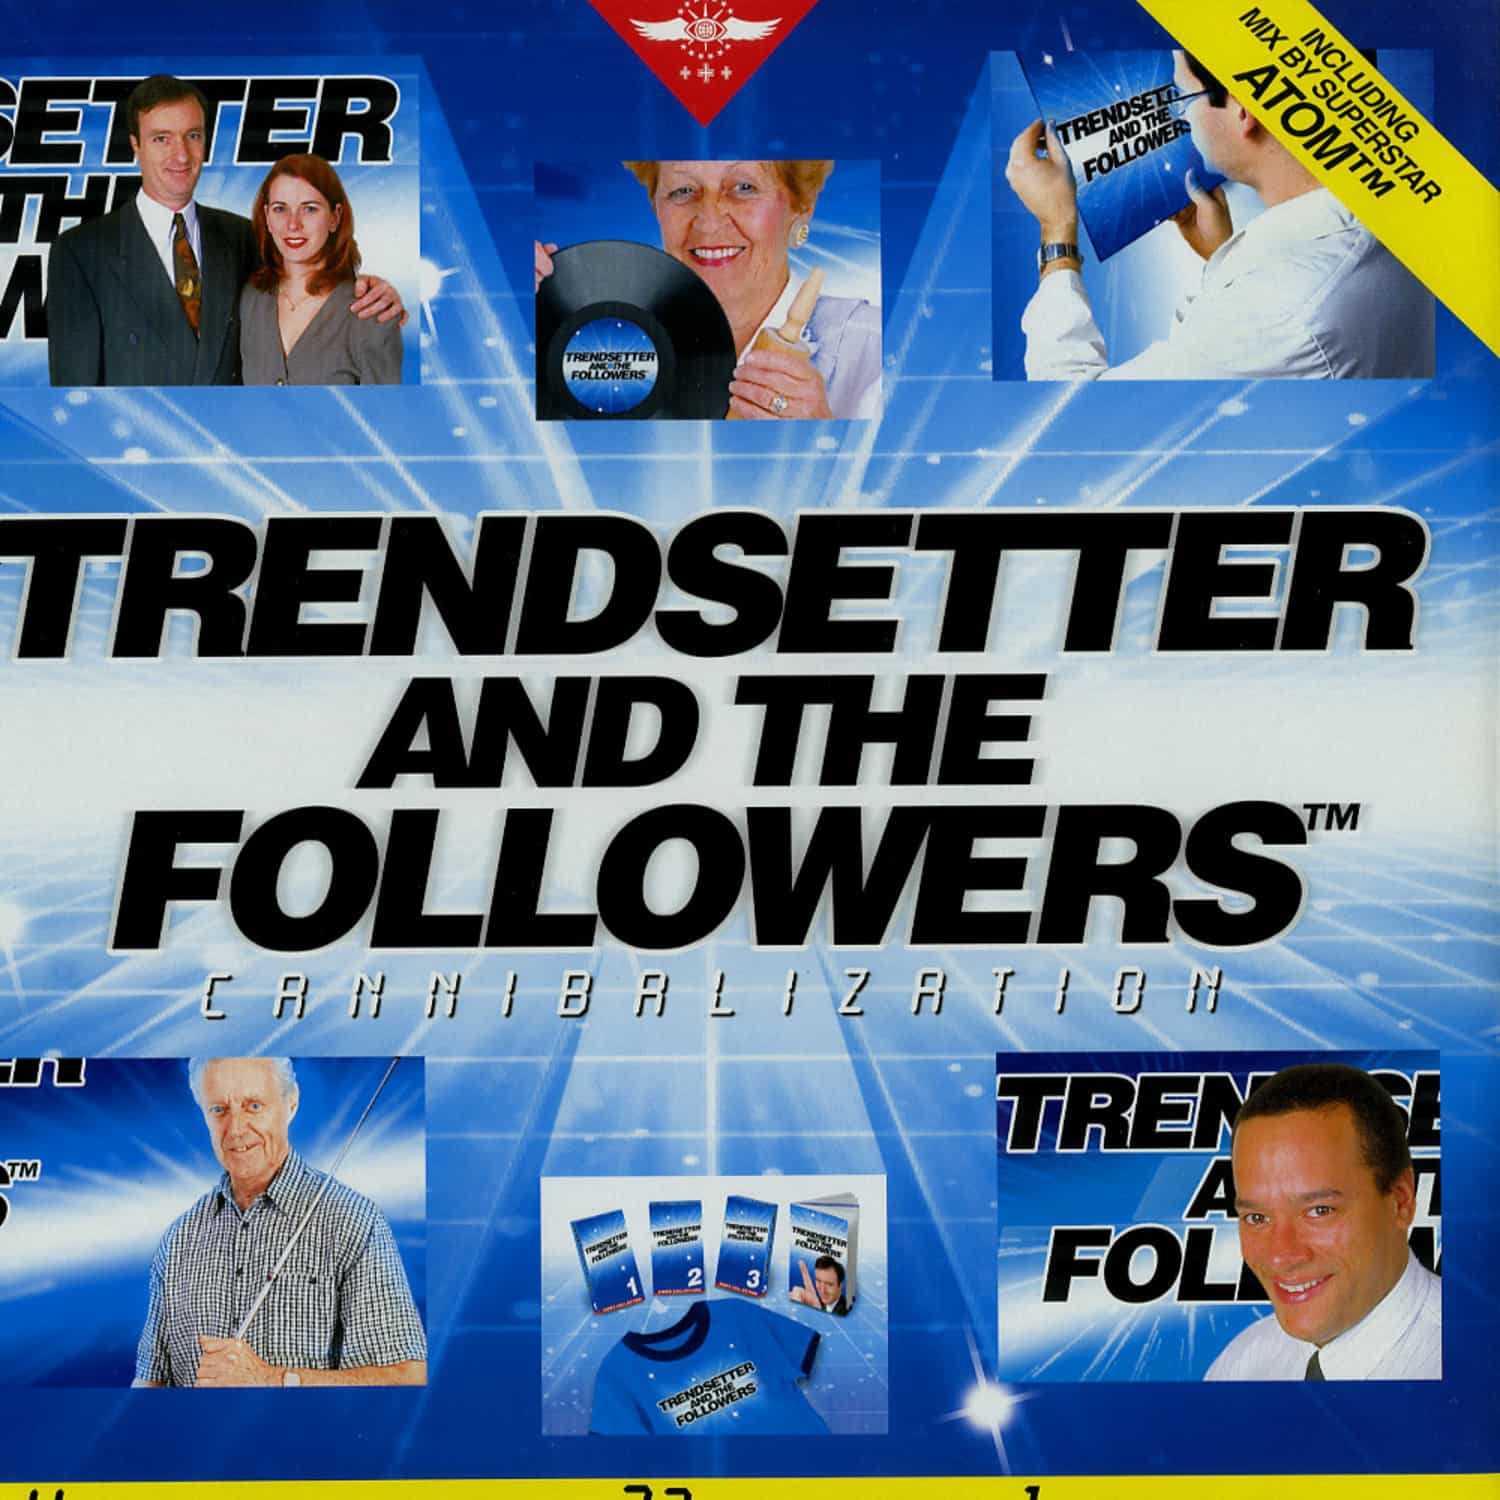 Trendsetter And The Followers - CANNIBALIZATION